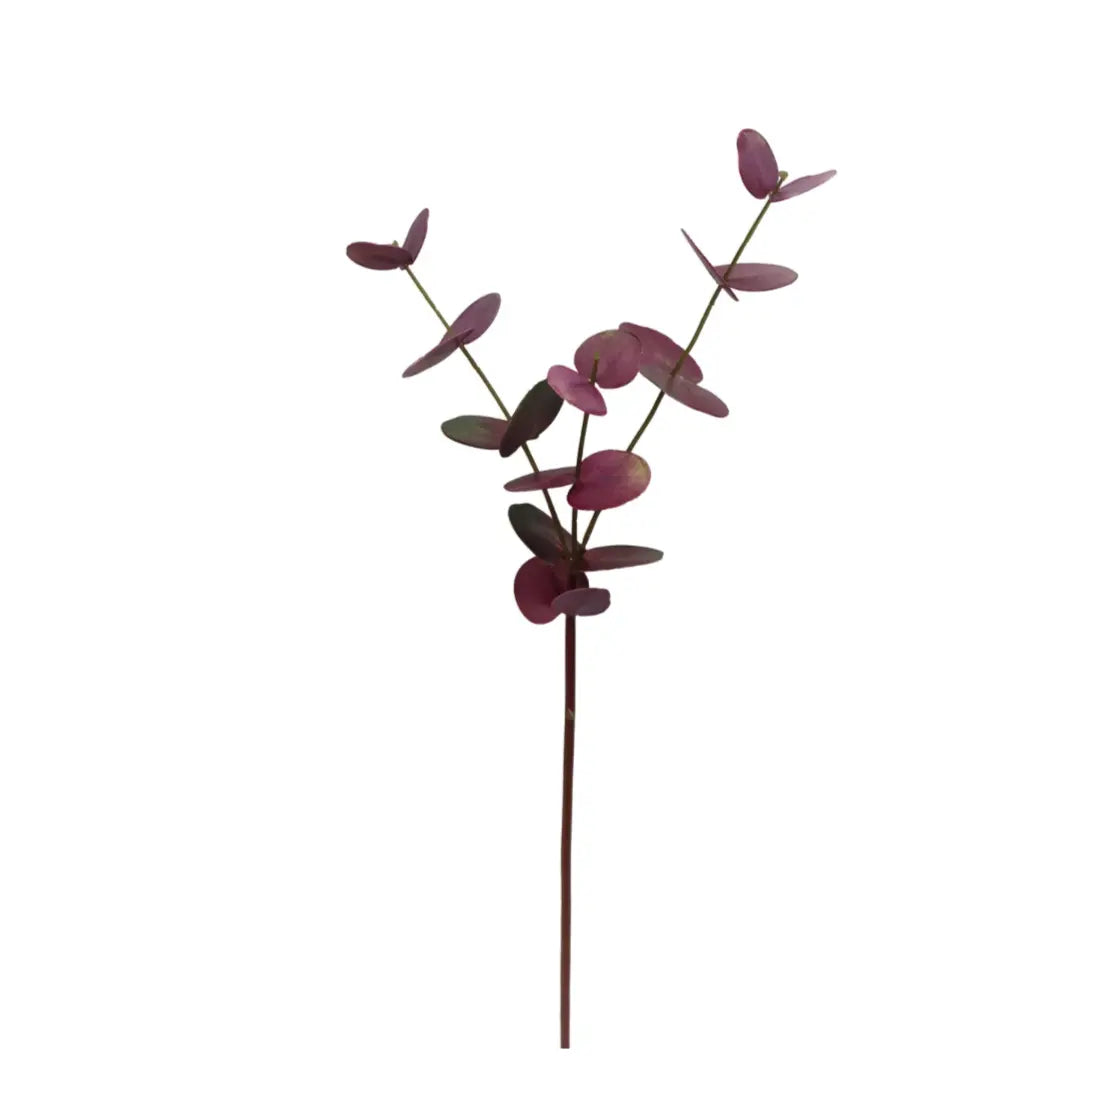 Home Smith Eucalyptus Stems in Deep Burgundy Winward Stems, Blooms & Branches